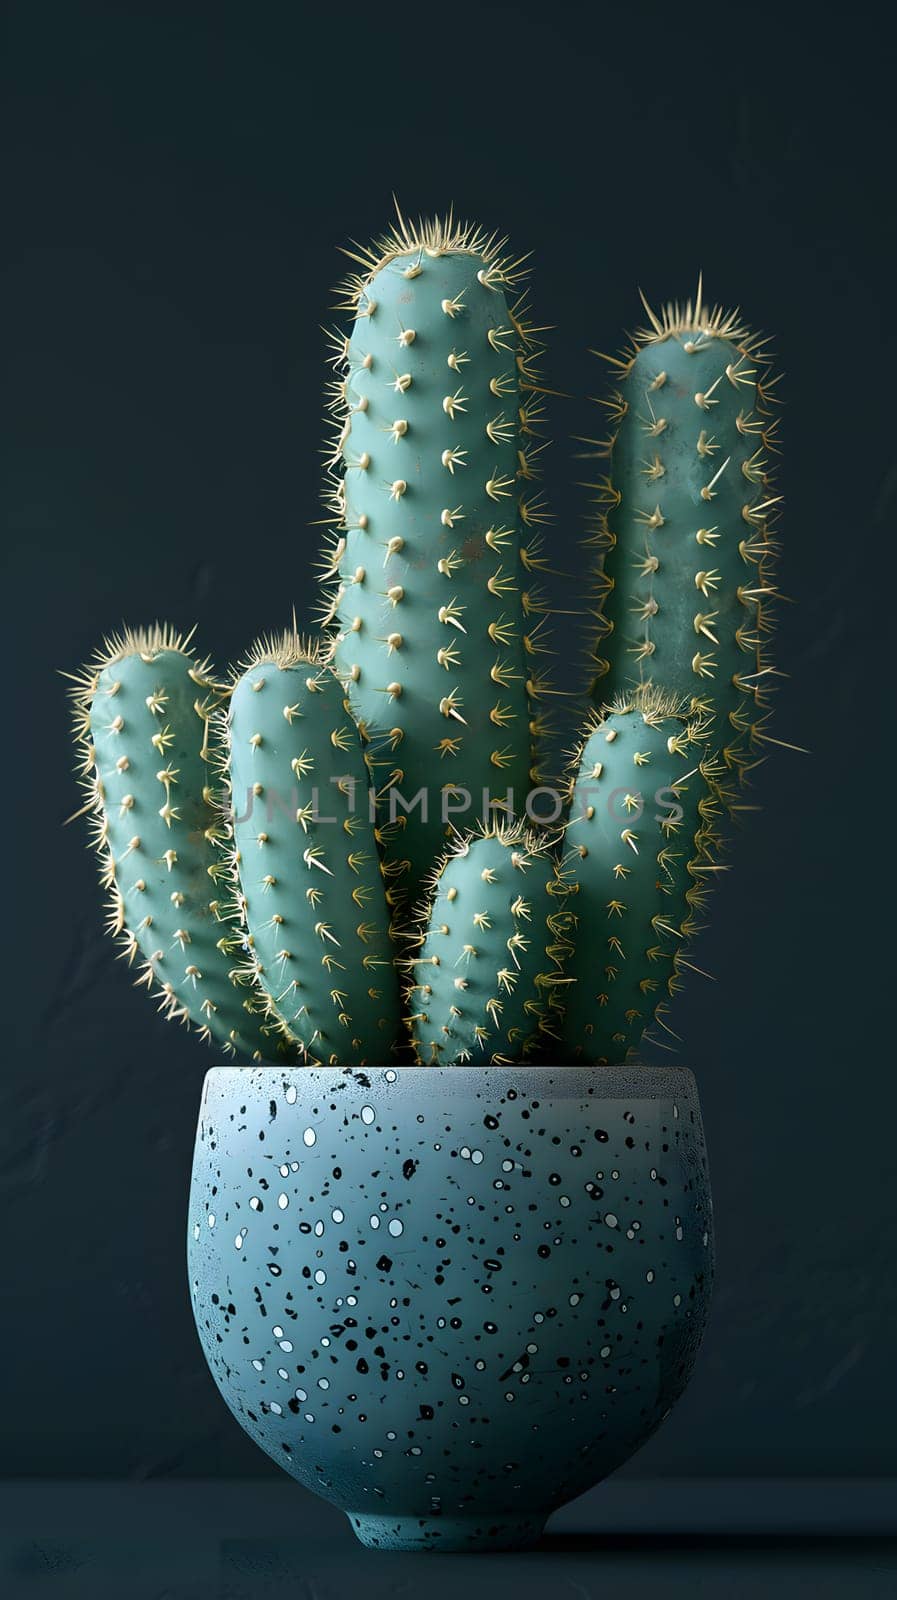 A succulent plant, the cactus, is thriving in an electric blue pot on a table. Its thorns, spines, and prickles add a fashionable touch to the still life photography scene